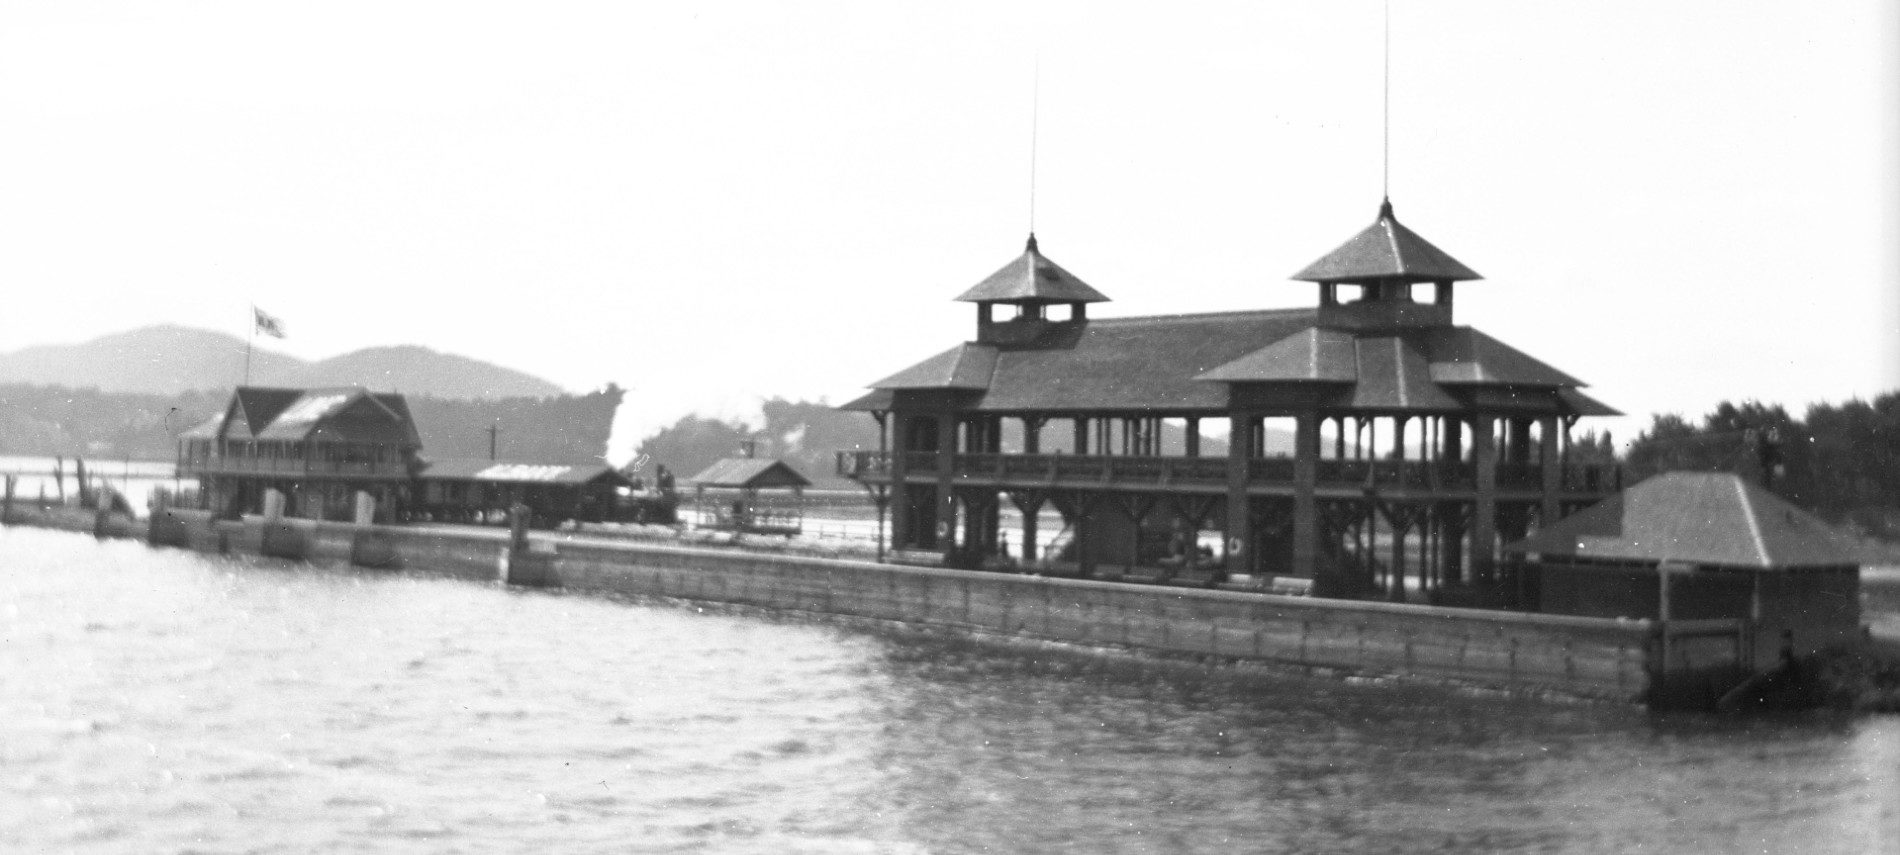 Black and white historic photo of two buildings on a point on a river